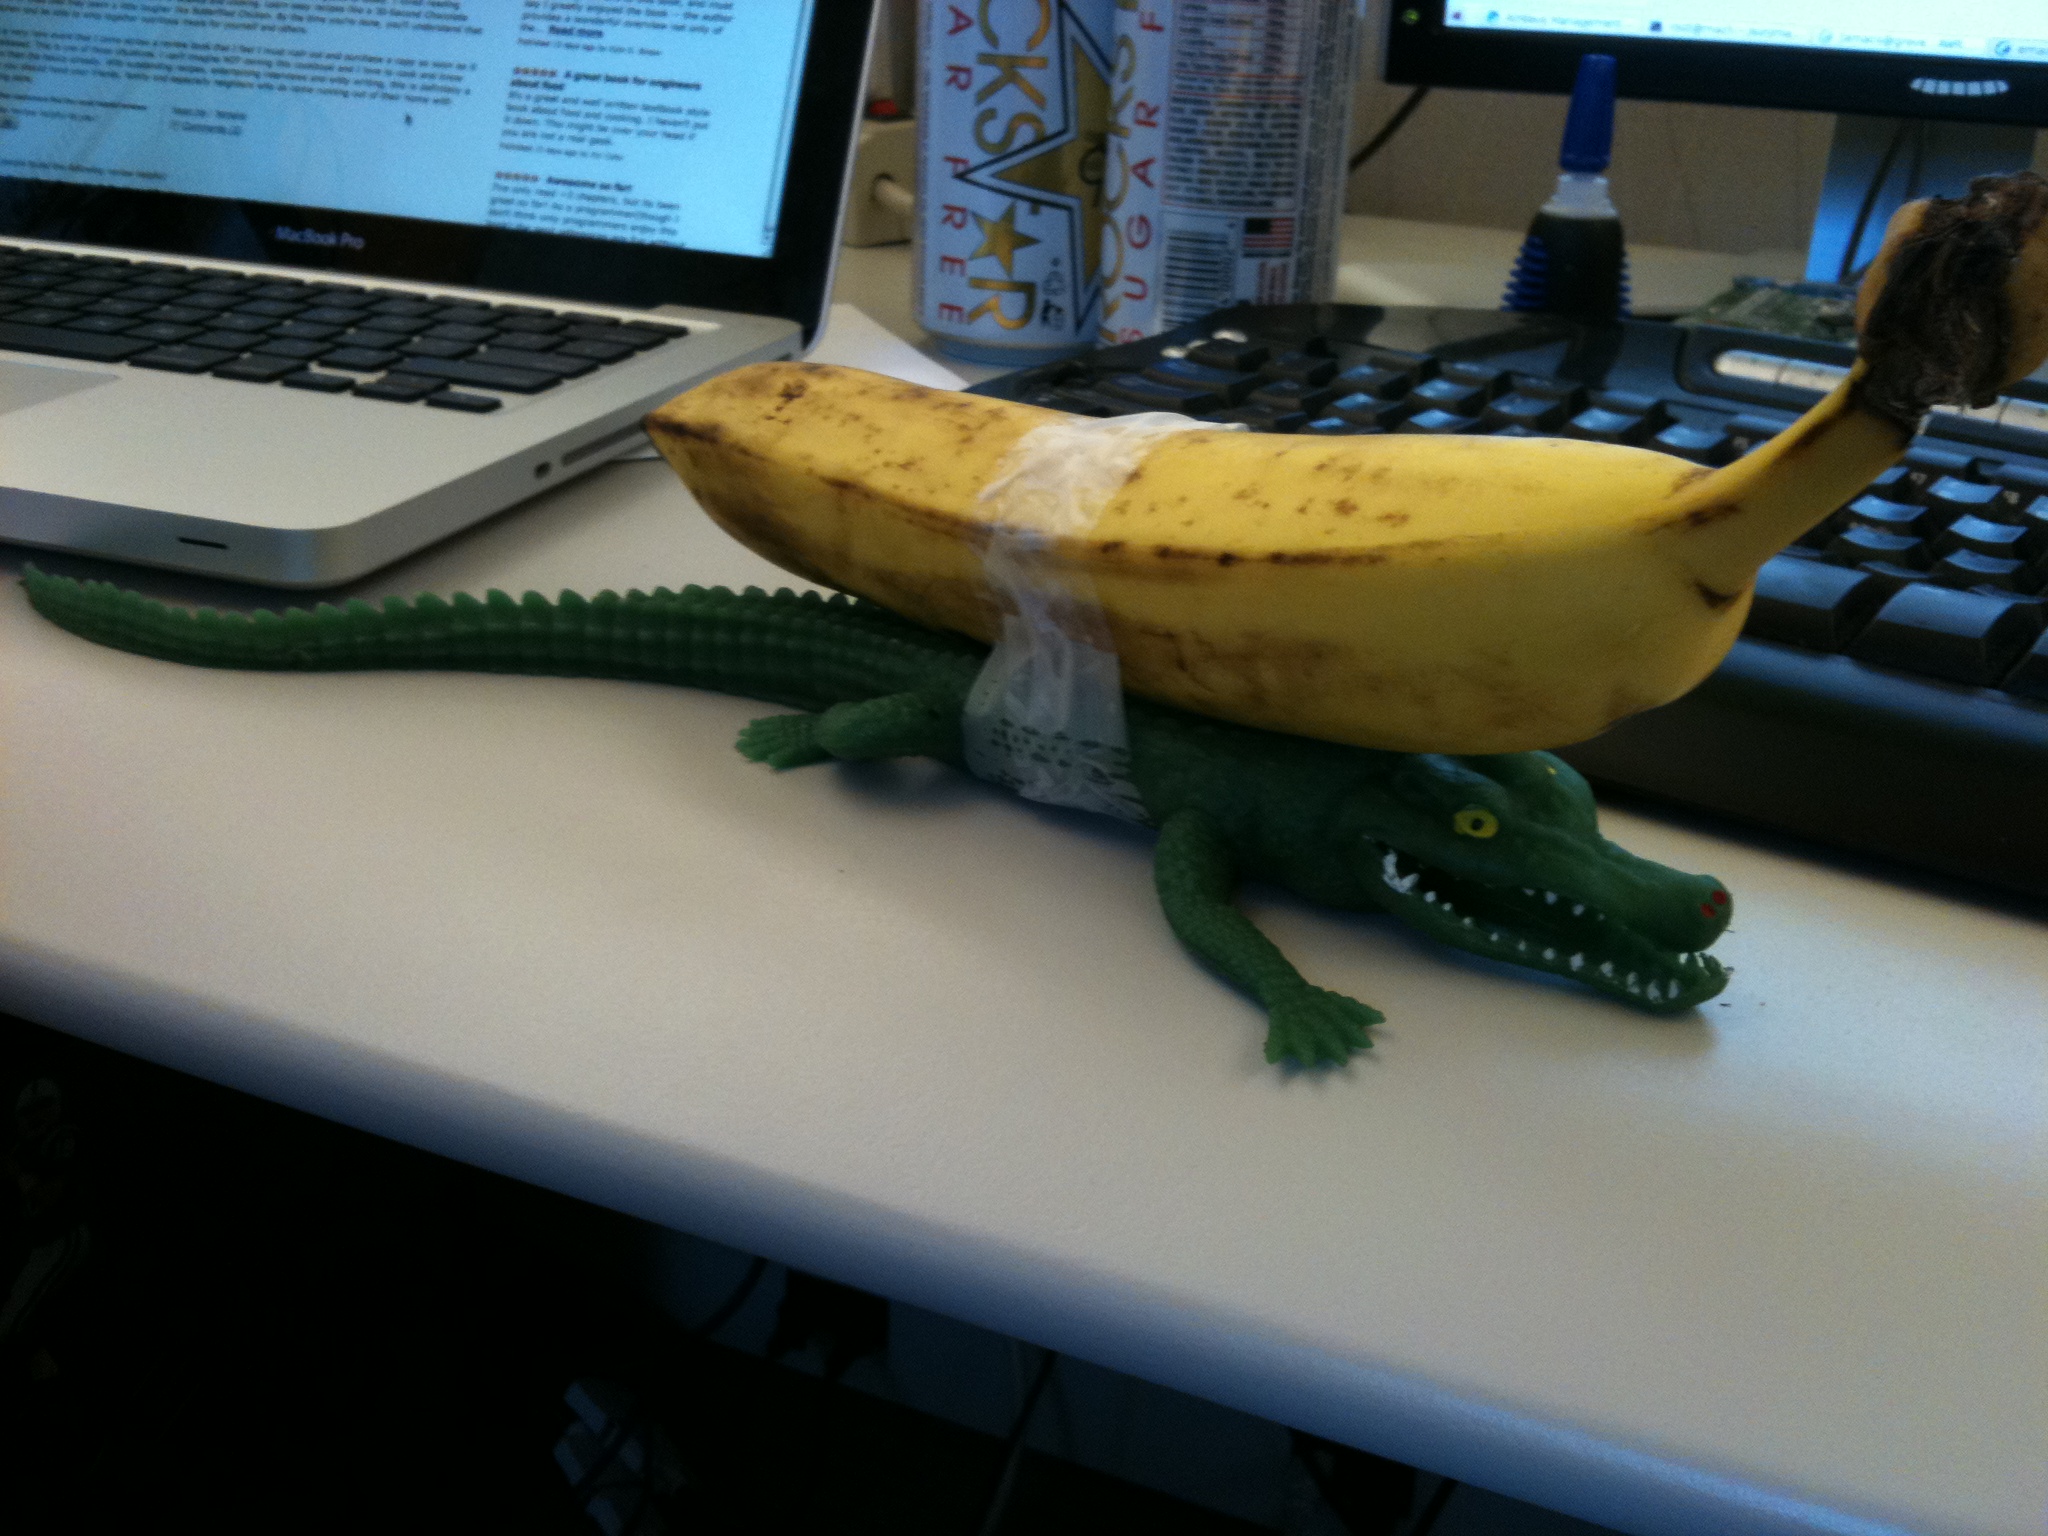 banana in front of laptop on desk with fake lizard like tail